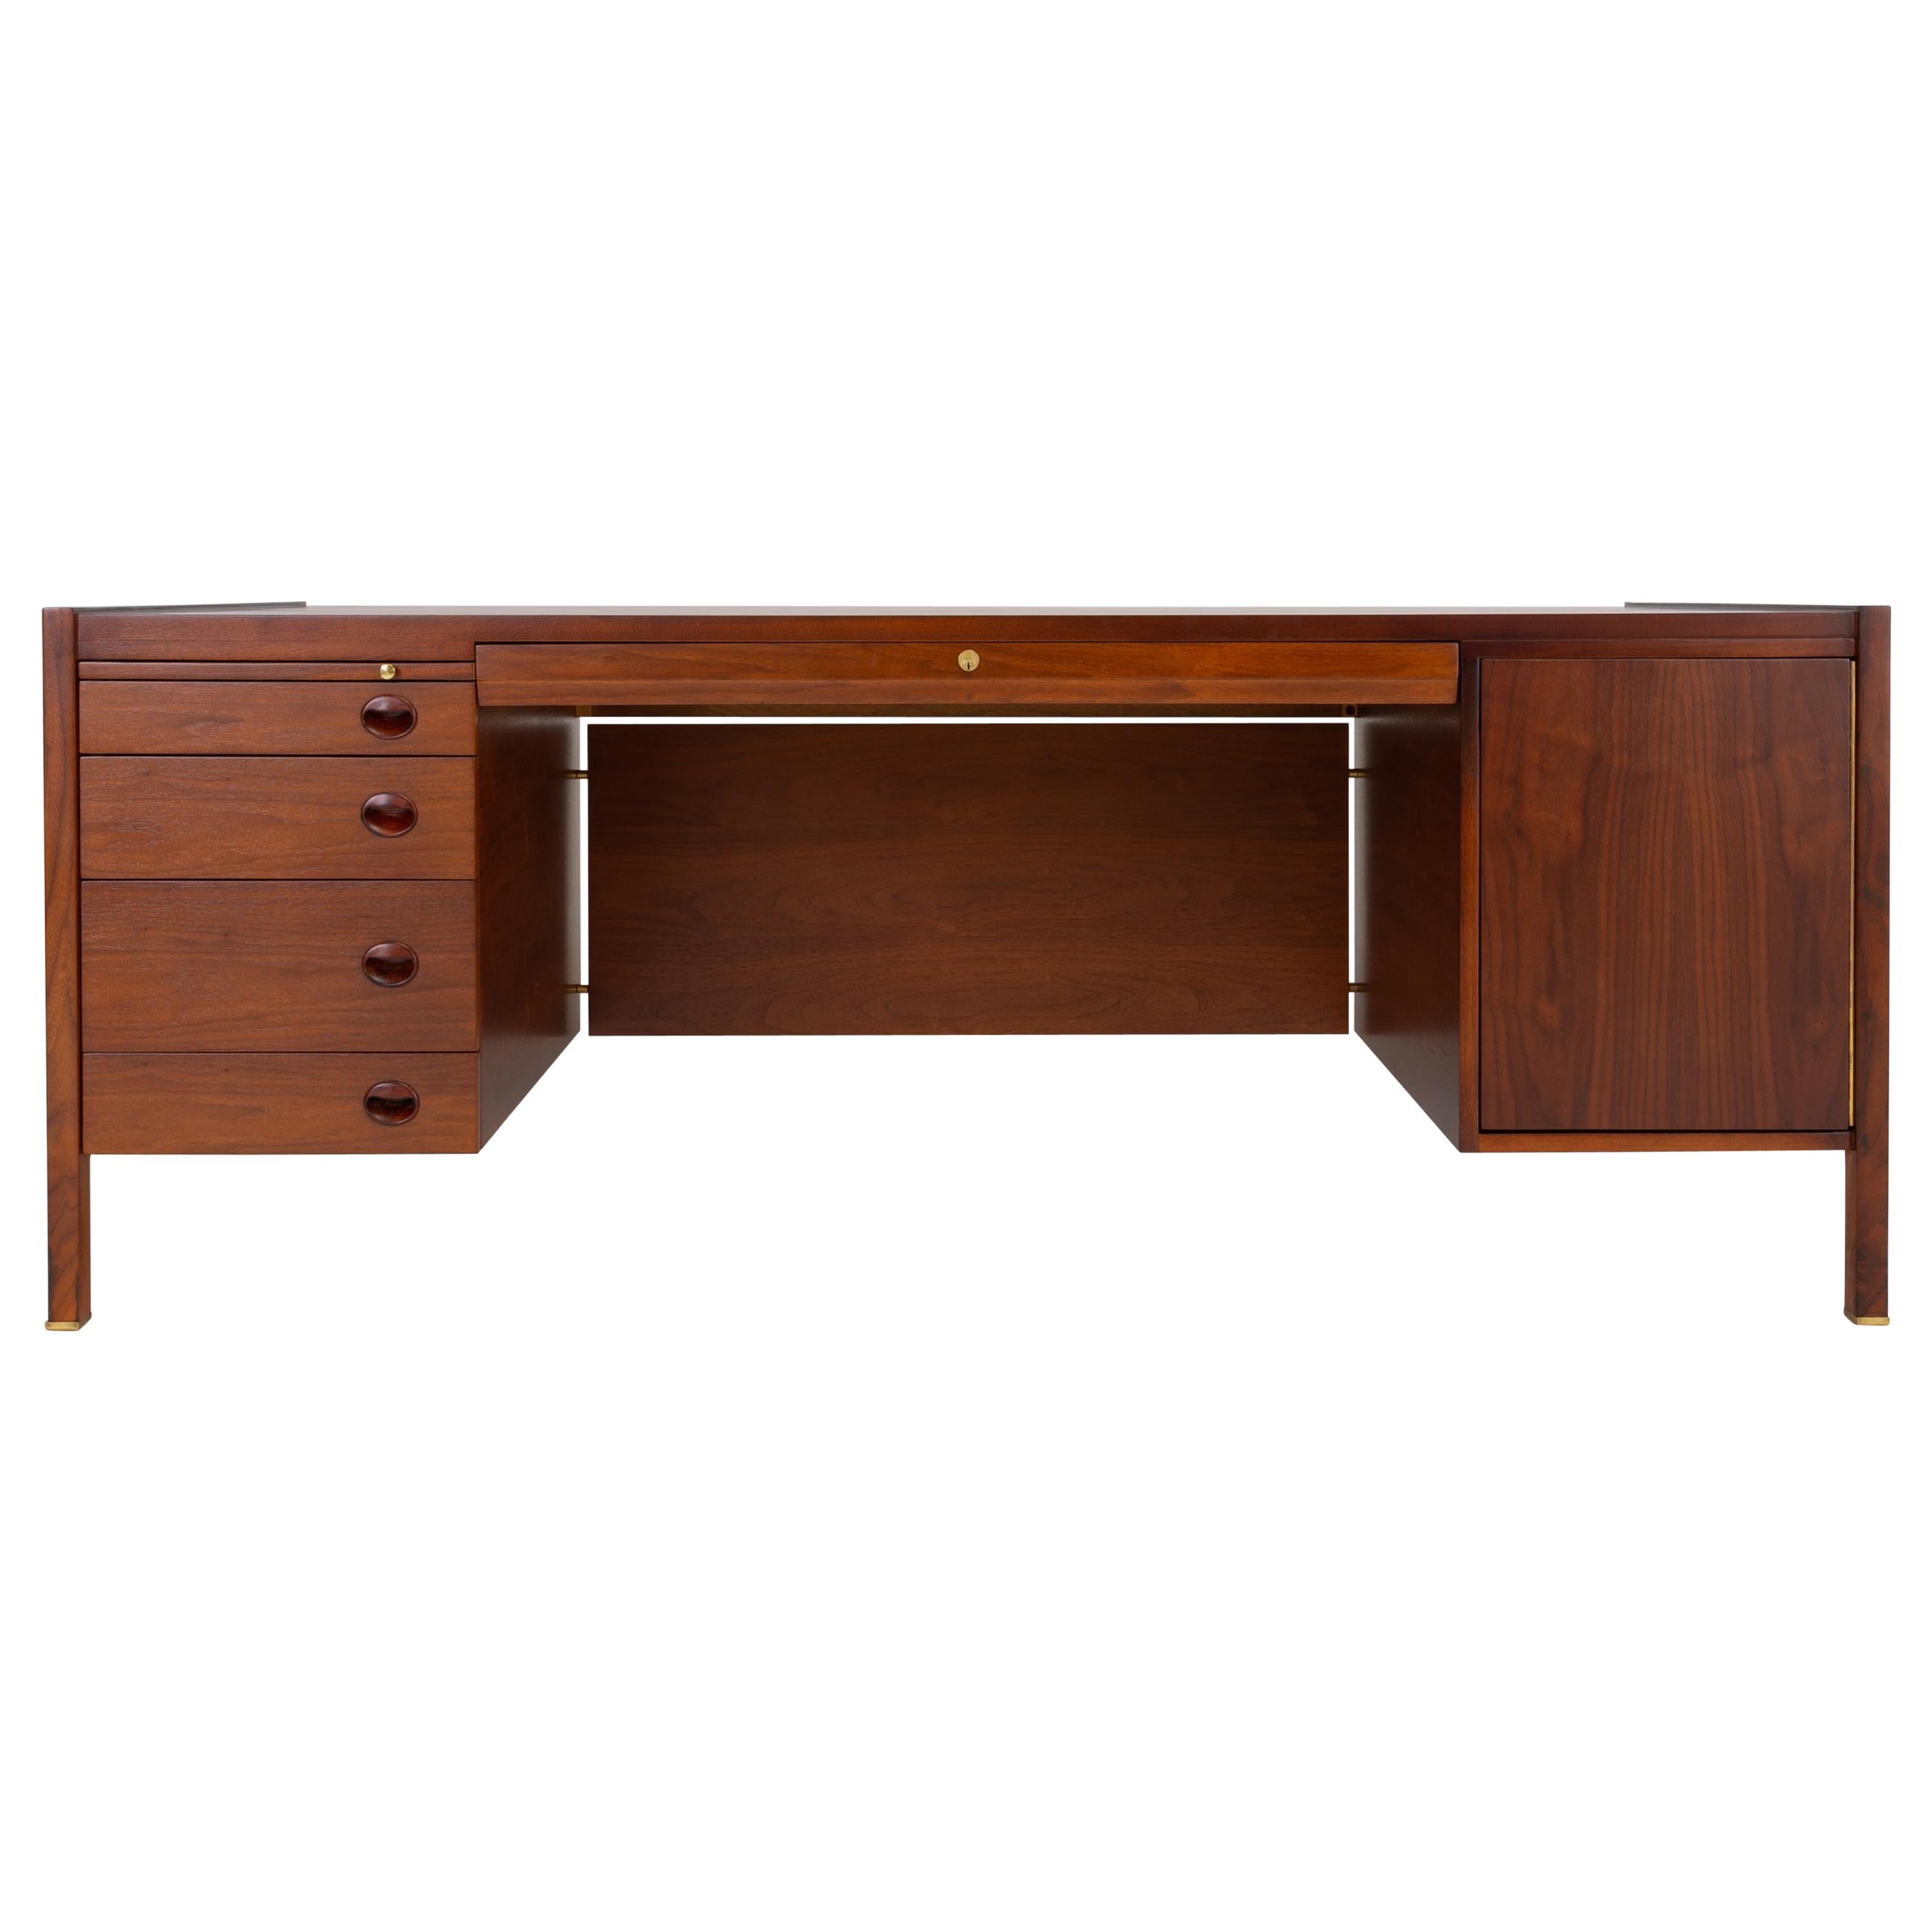 Walnut Executive Desk with Rosewood and Brass Details, Edward Wormley for Dunbar